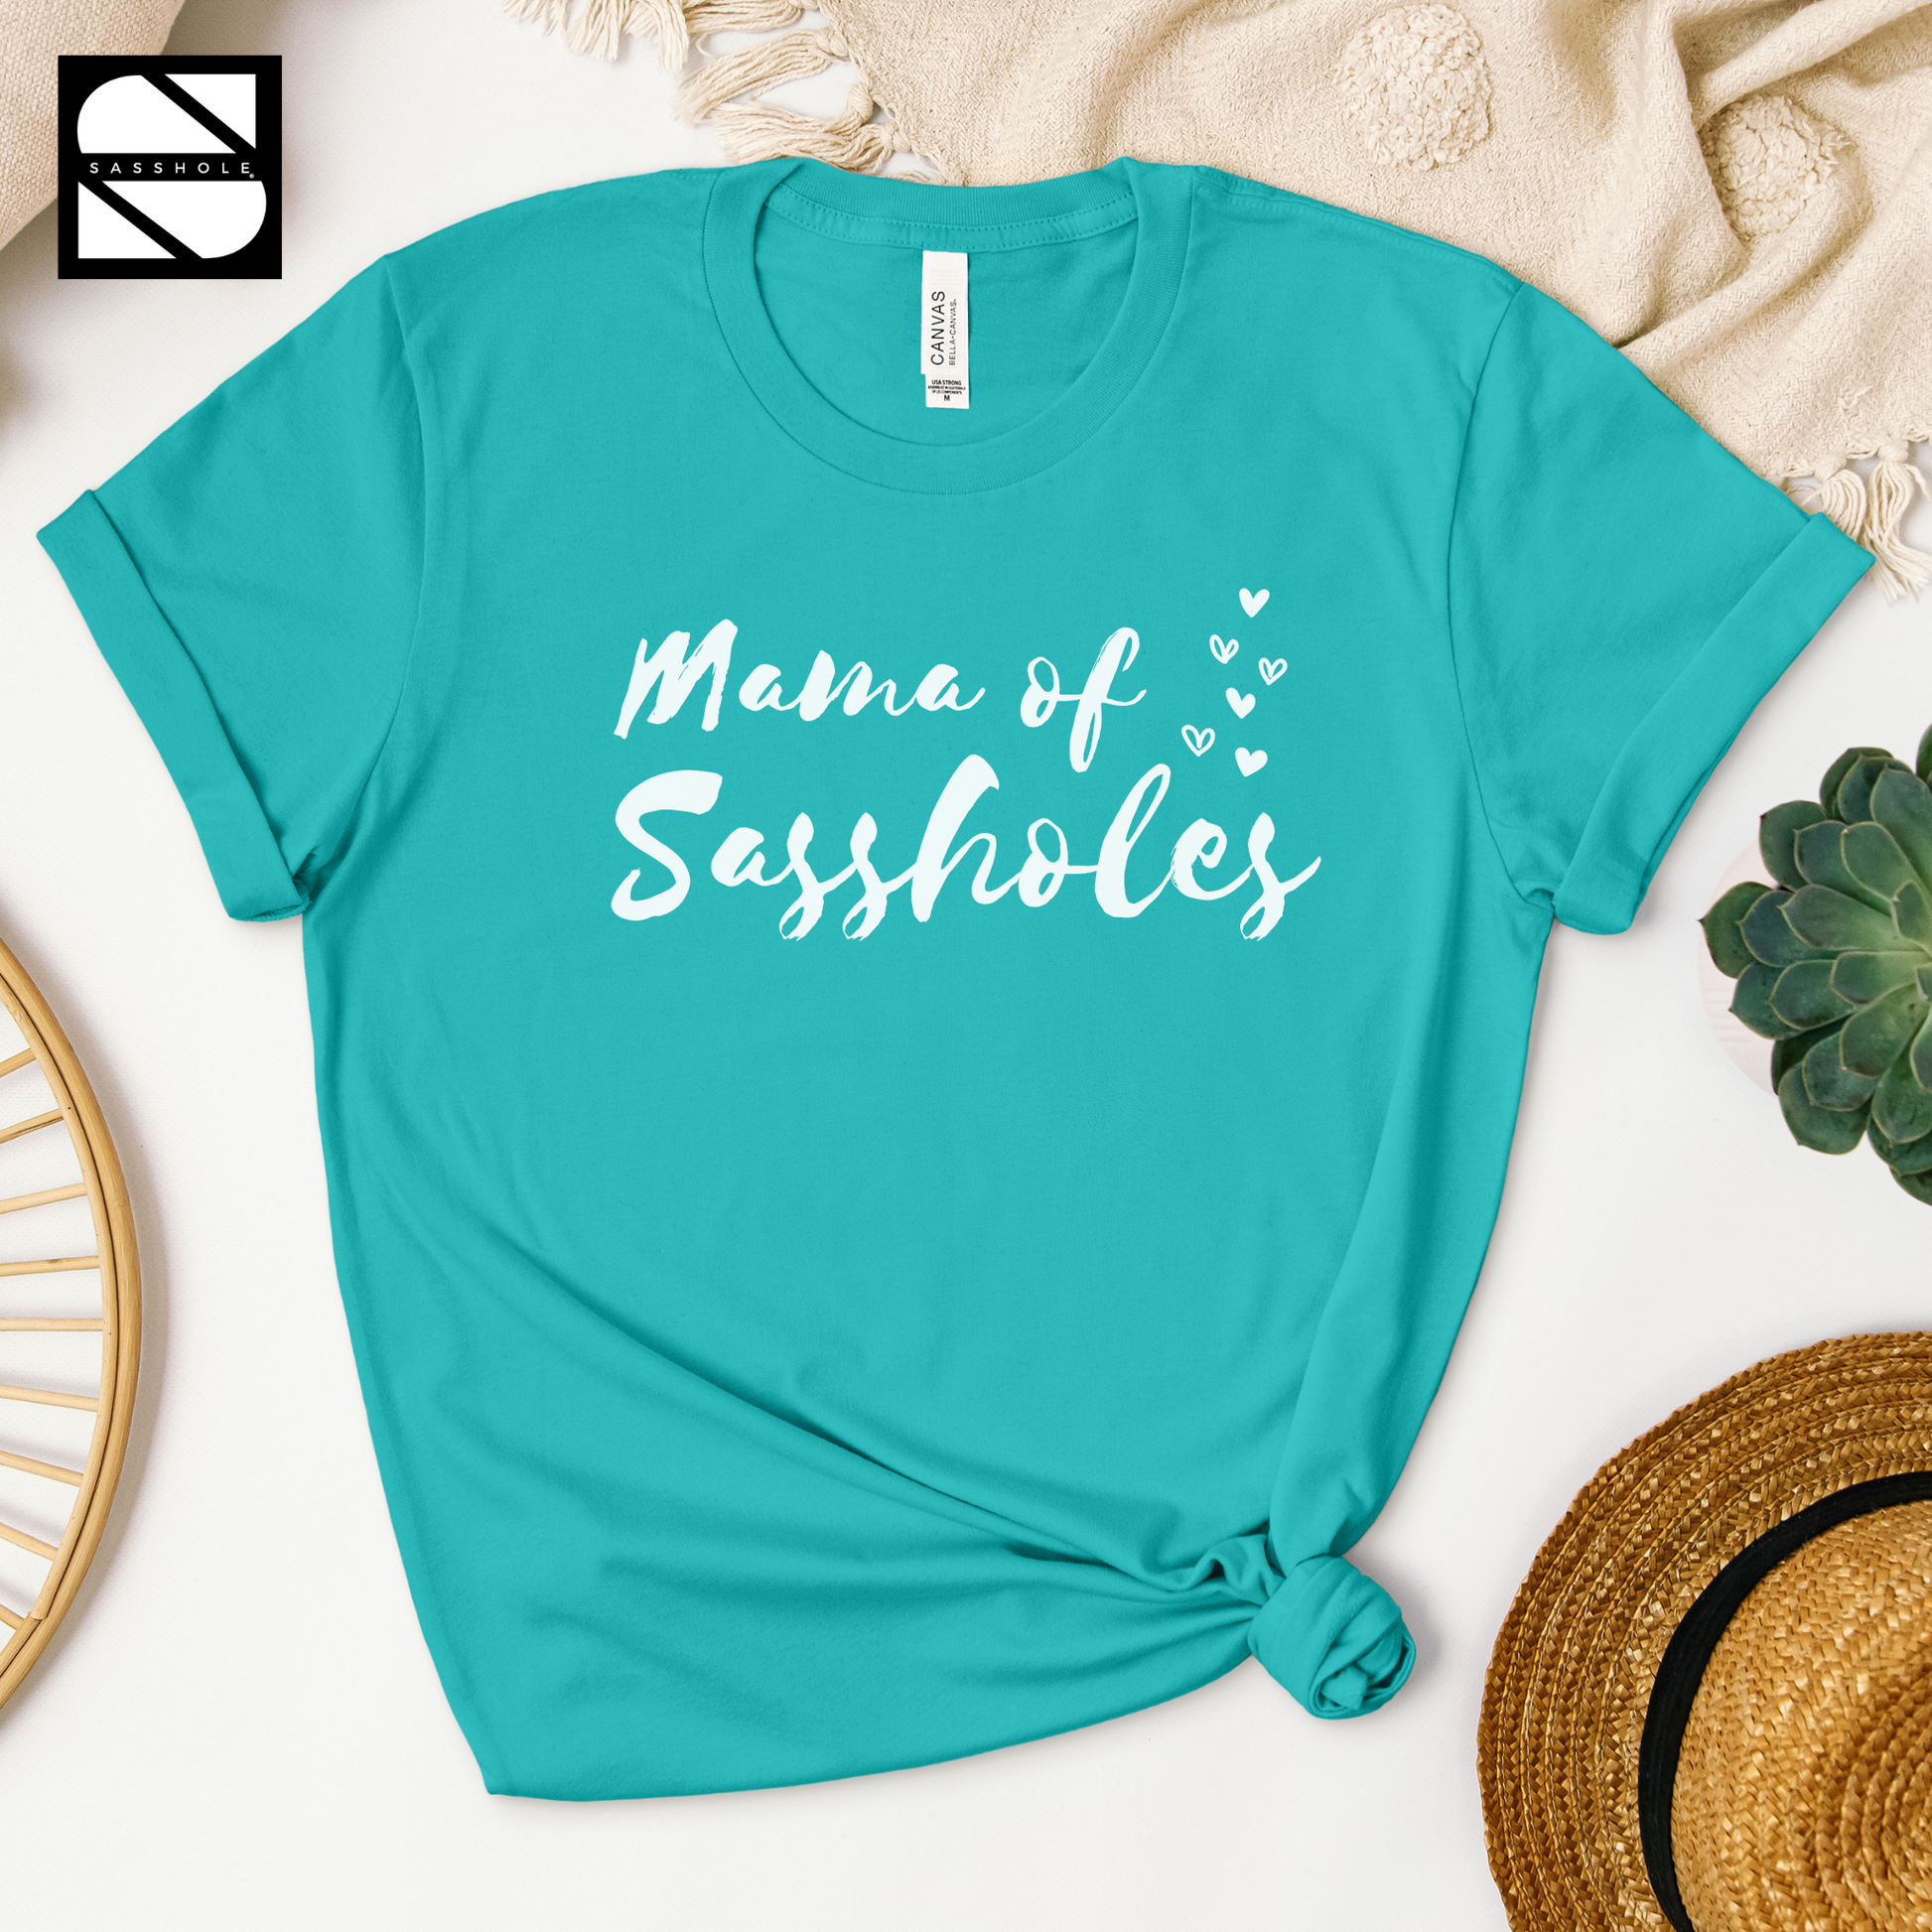 women's shirts funny teal